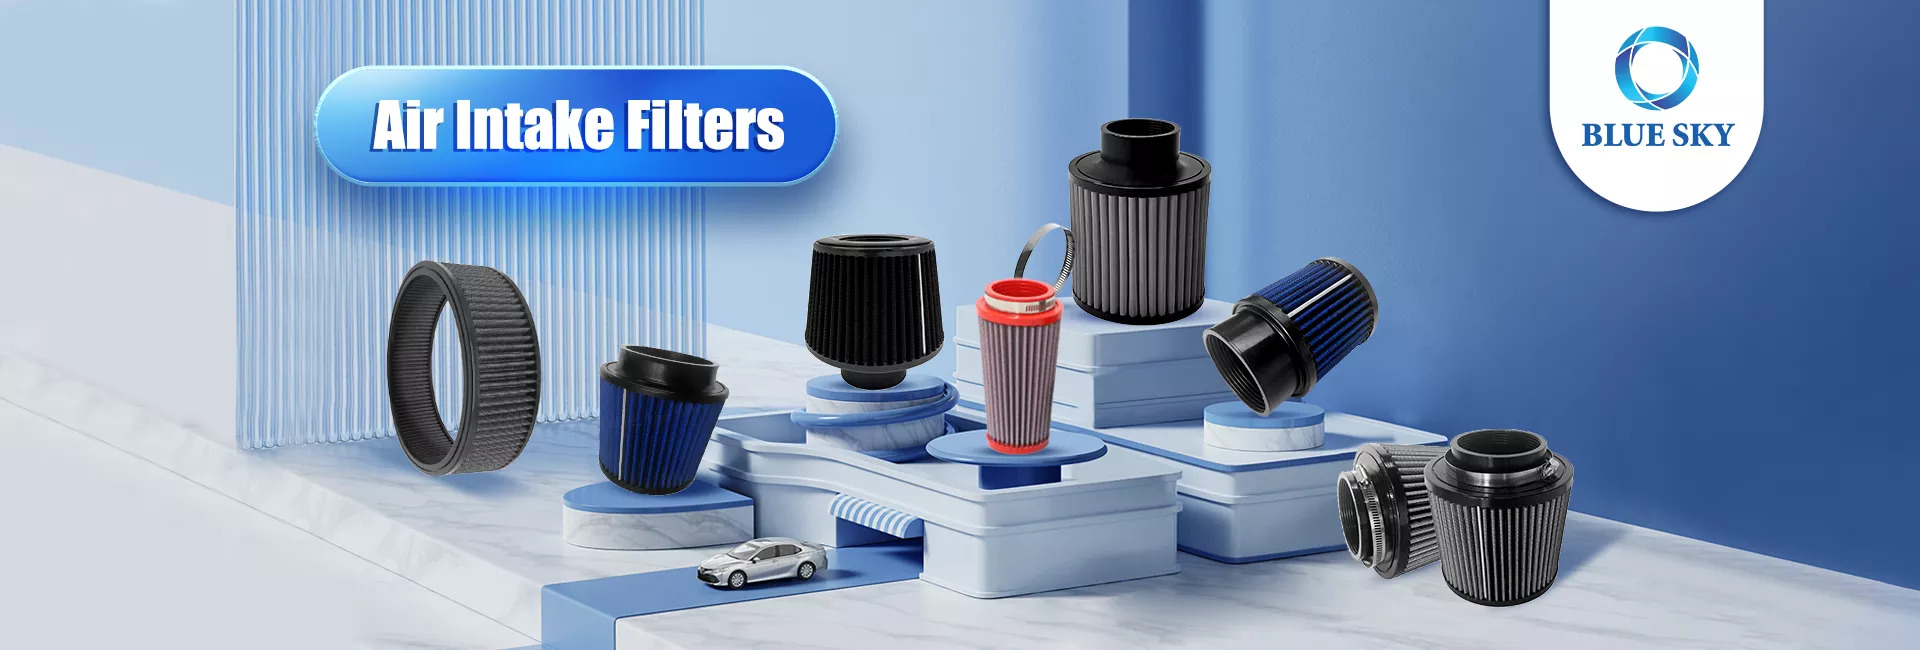 Blue Sky Hot Sales Auto Filter Air Intake Filter Products